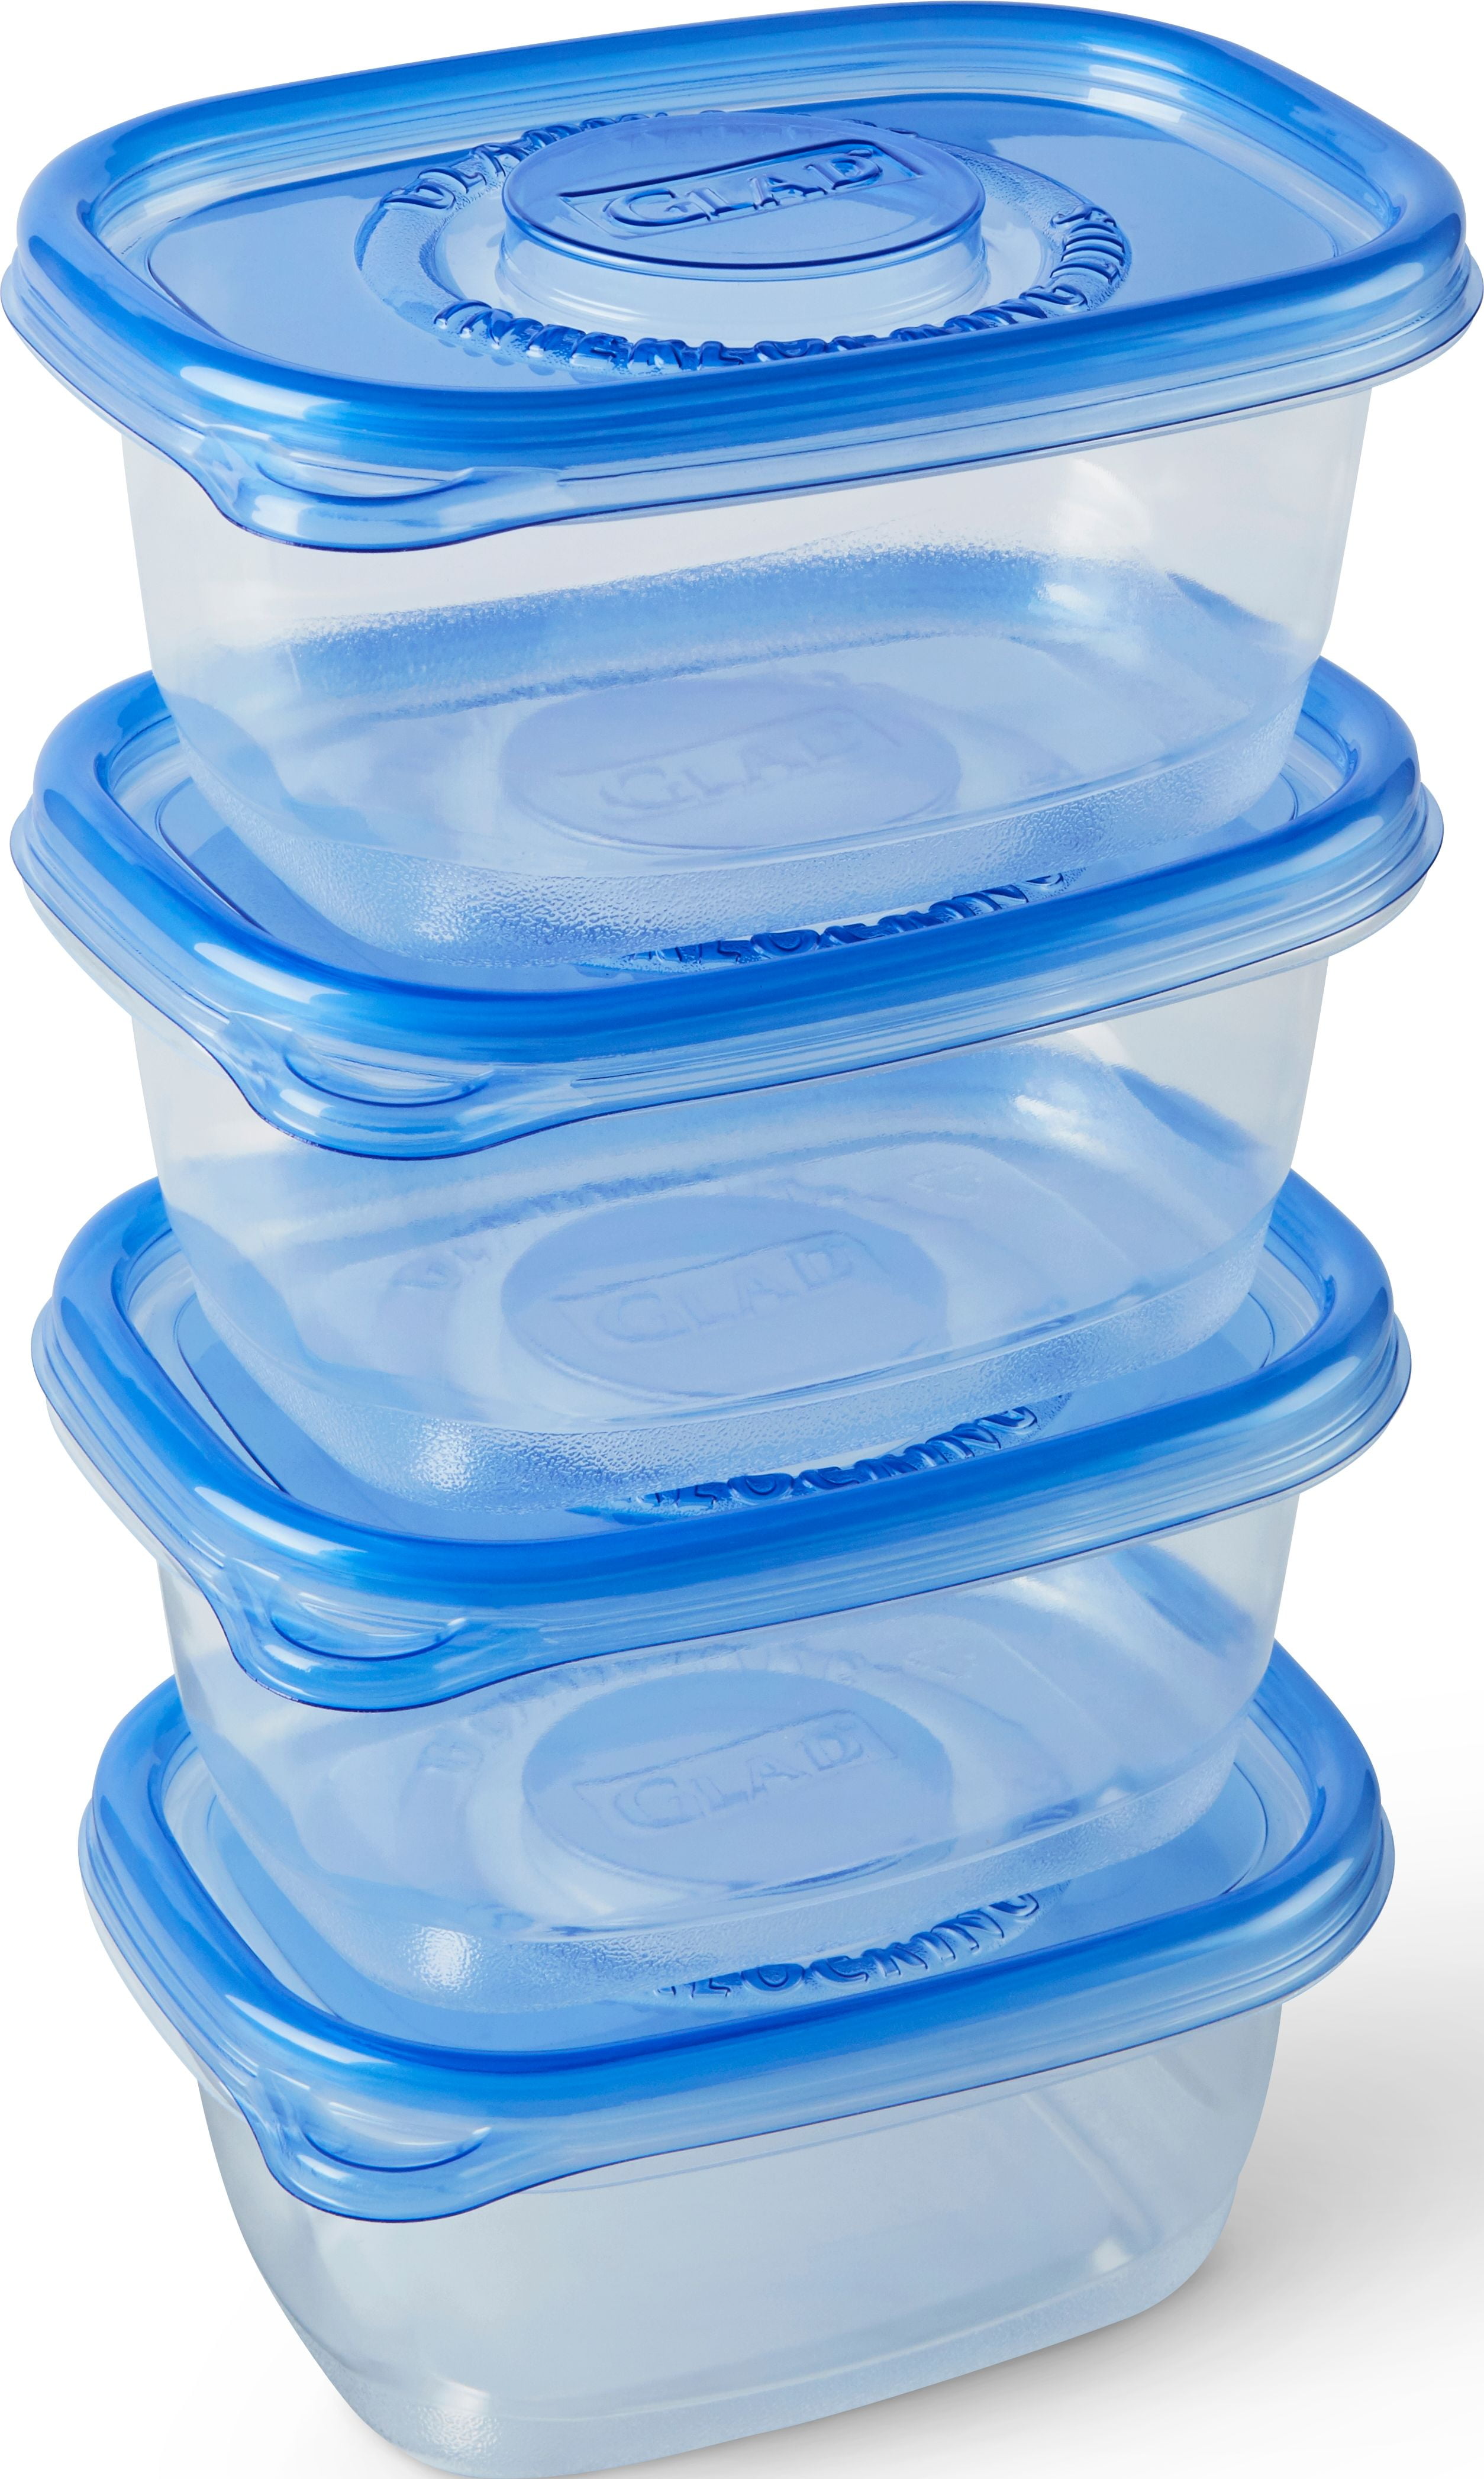 Glad Food Storage Containers - Snack Containers - Holiday Edition